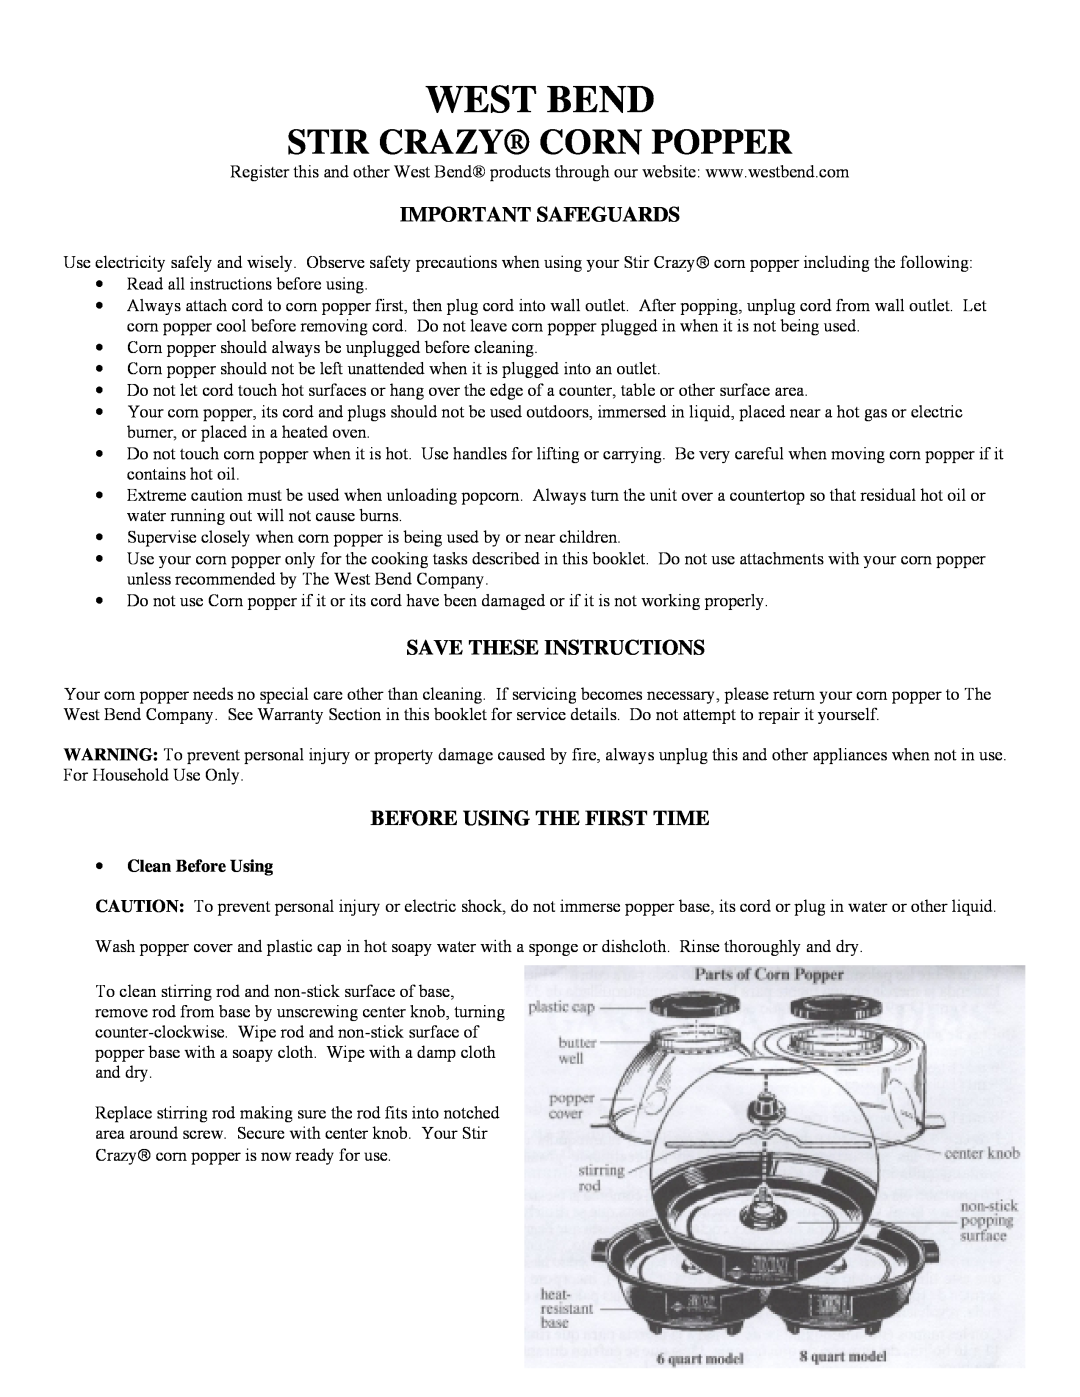 West Bend Corn Popper warranty Important Safeguards, Save These Instructions, Before Using The First Time, West Bend 